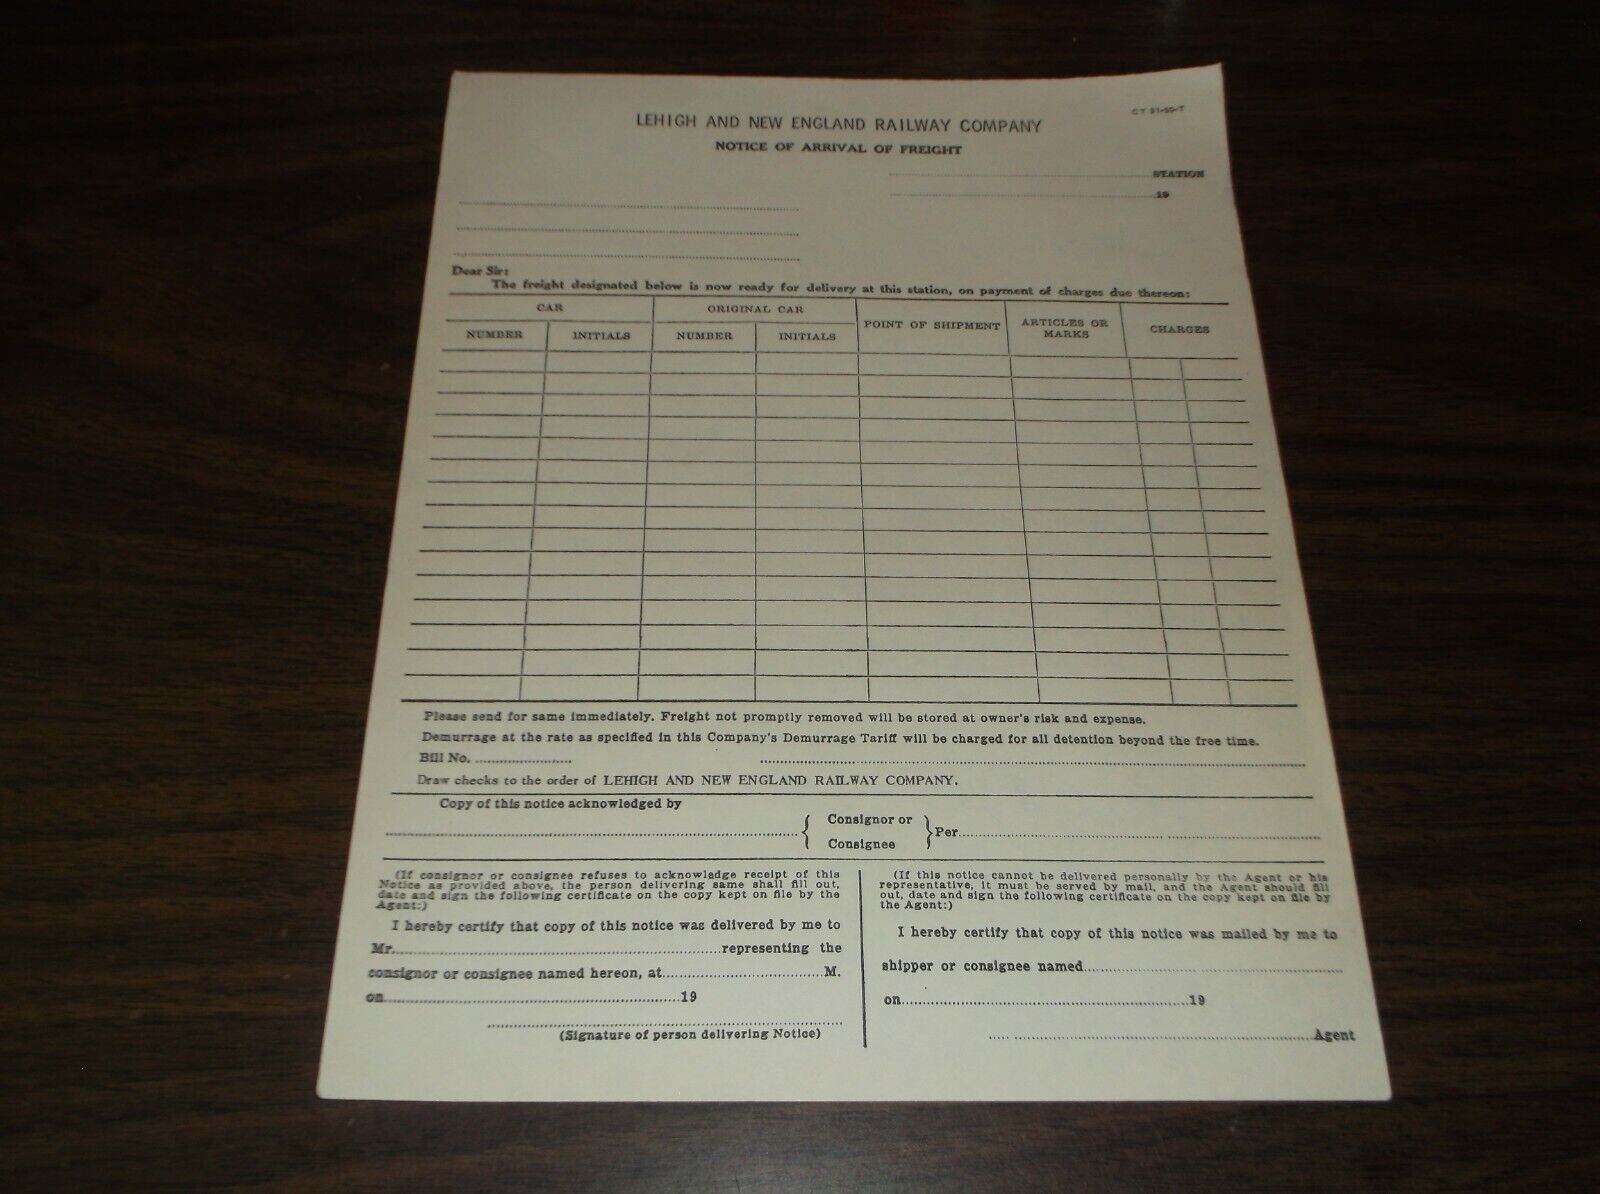 RARE 1950 L&NE LEHIGH AND NEW ENGLAND FREIGHT ARRIVAL FORM